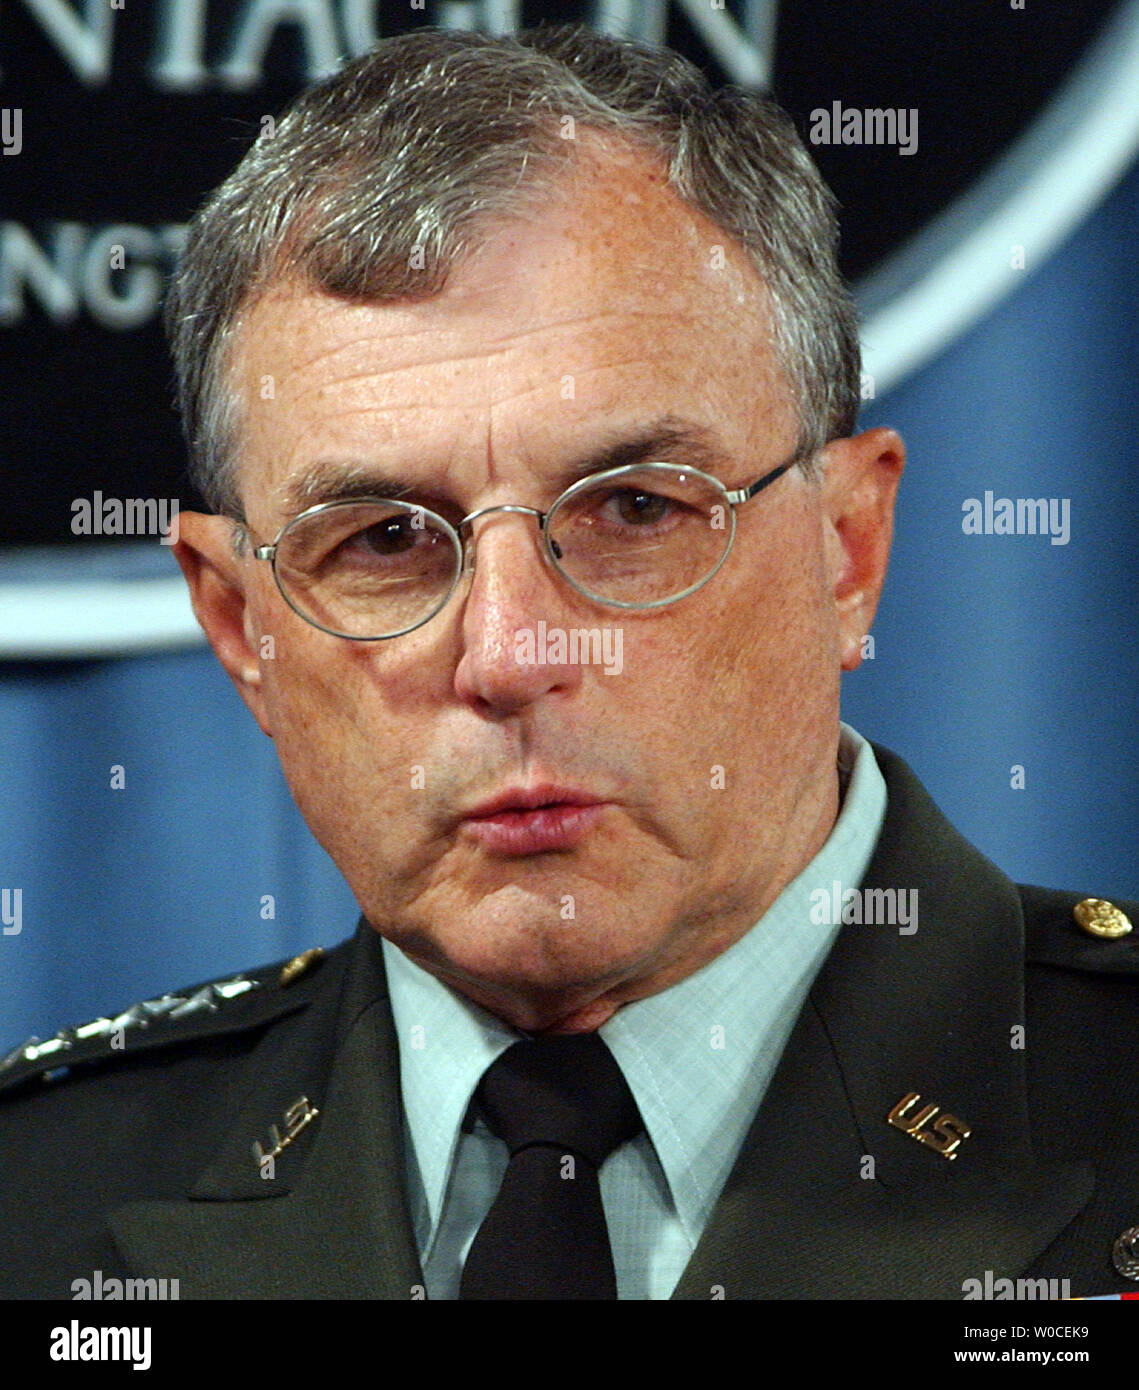 Gen. Paul Kern answers questions from reporters about abuse at the Abu Ghraib prison in Iraq during a news conference at the Pentagon on Aug. 25, 2004, in Arlington, Va. The Defense Department investigation found that less than 50 individuals were to blame for the abuses, but that officers above them in the chain of command made errors that led to the conditions that resulted in the abuses.  (UPI Photo/Roger L. Wollenberg) Stock Photo